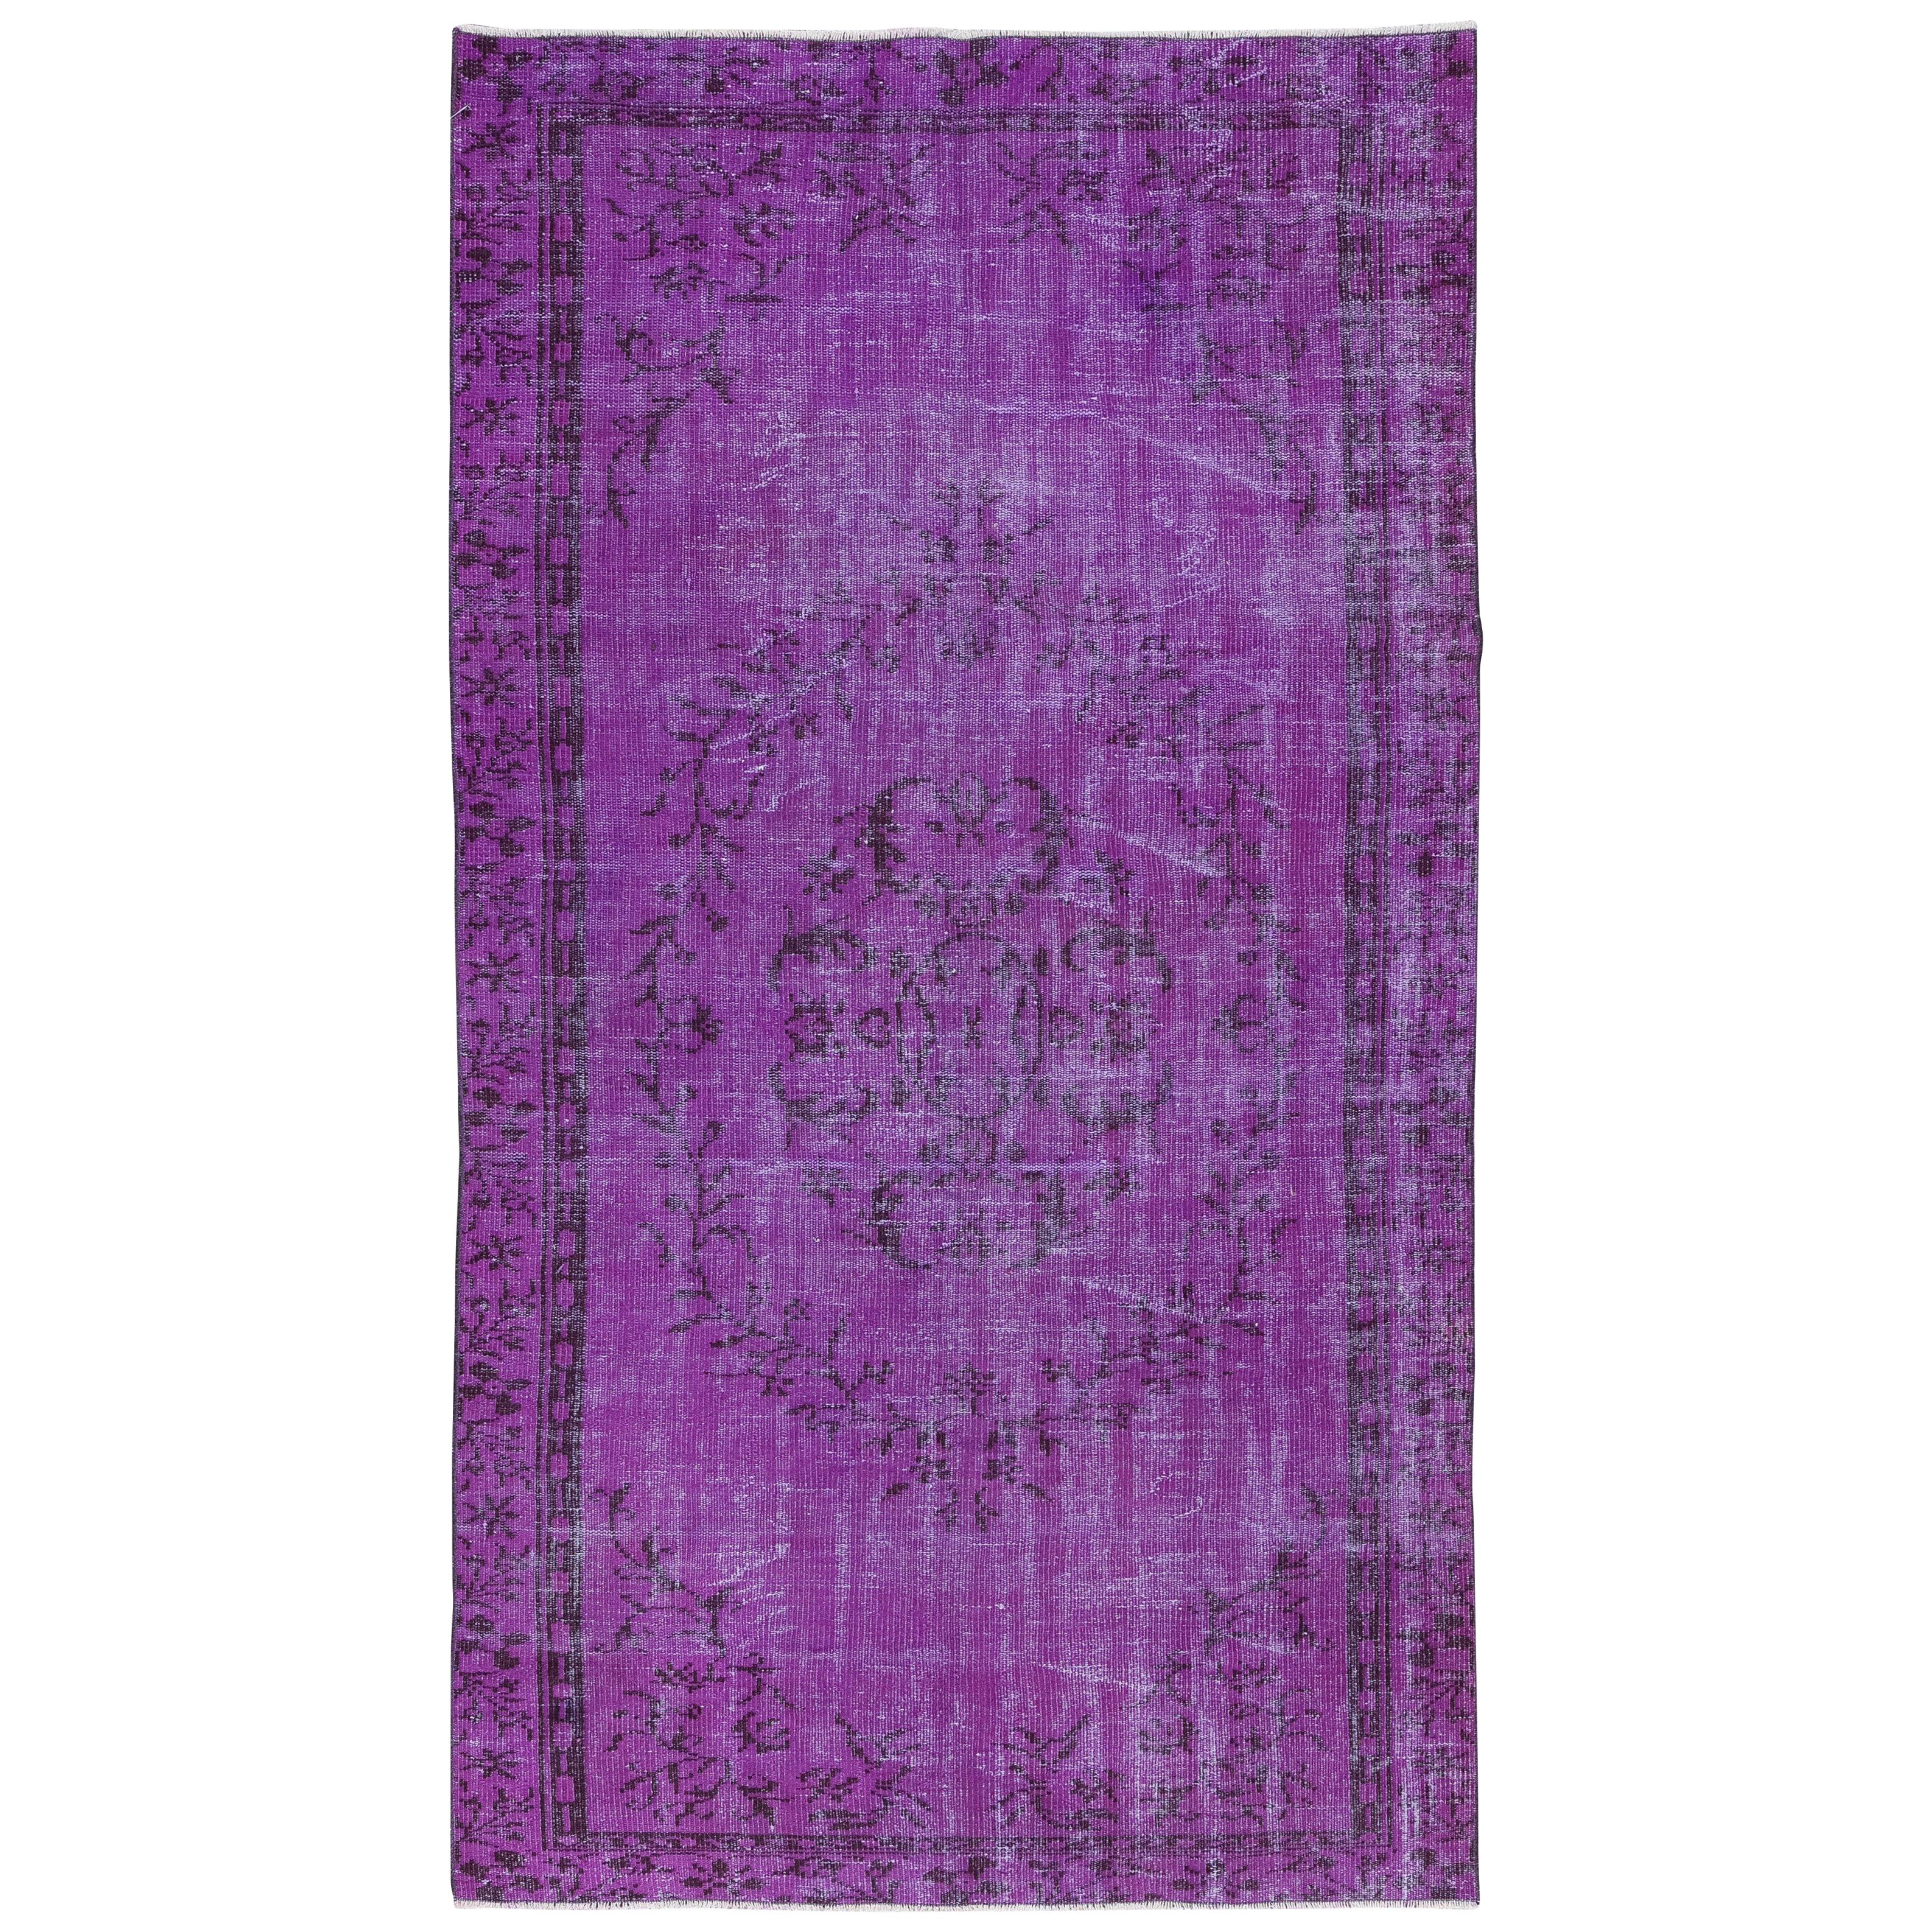 5x8.7 Ft Hand Knotted Turkish Area Rug in Purple, Ideal for Home & Office Decor